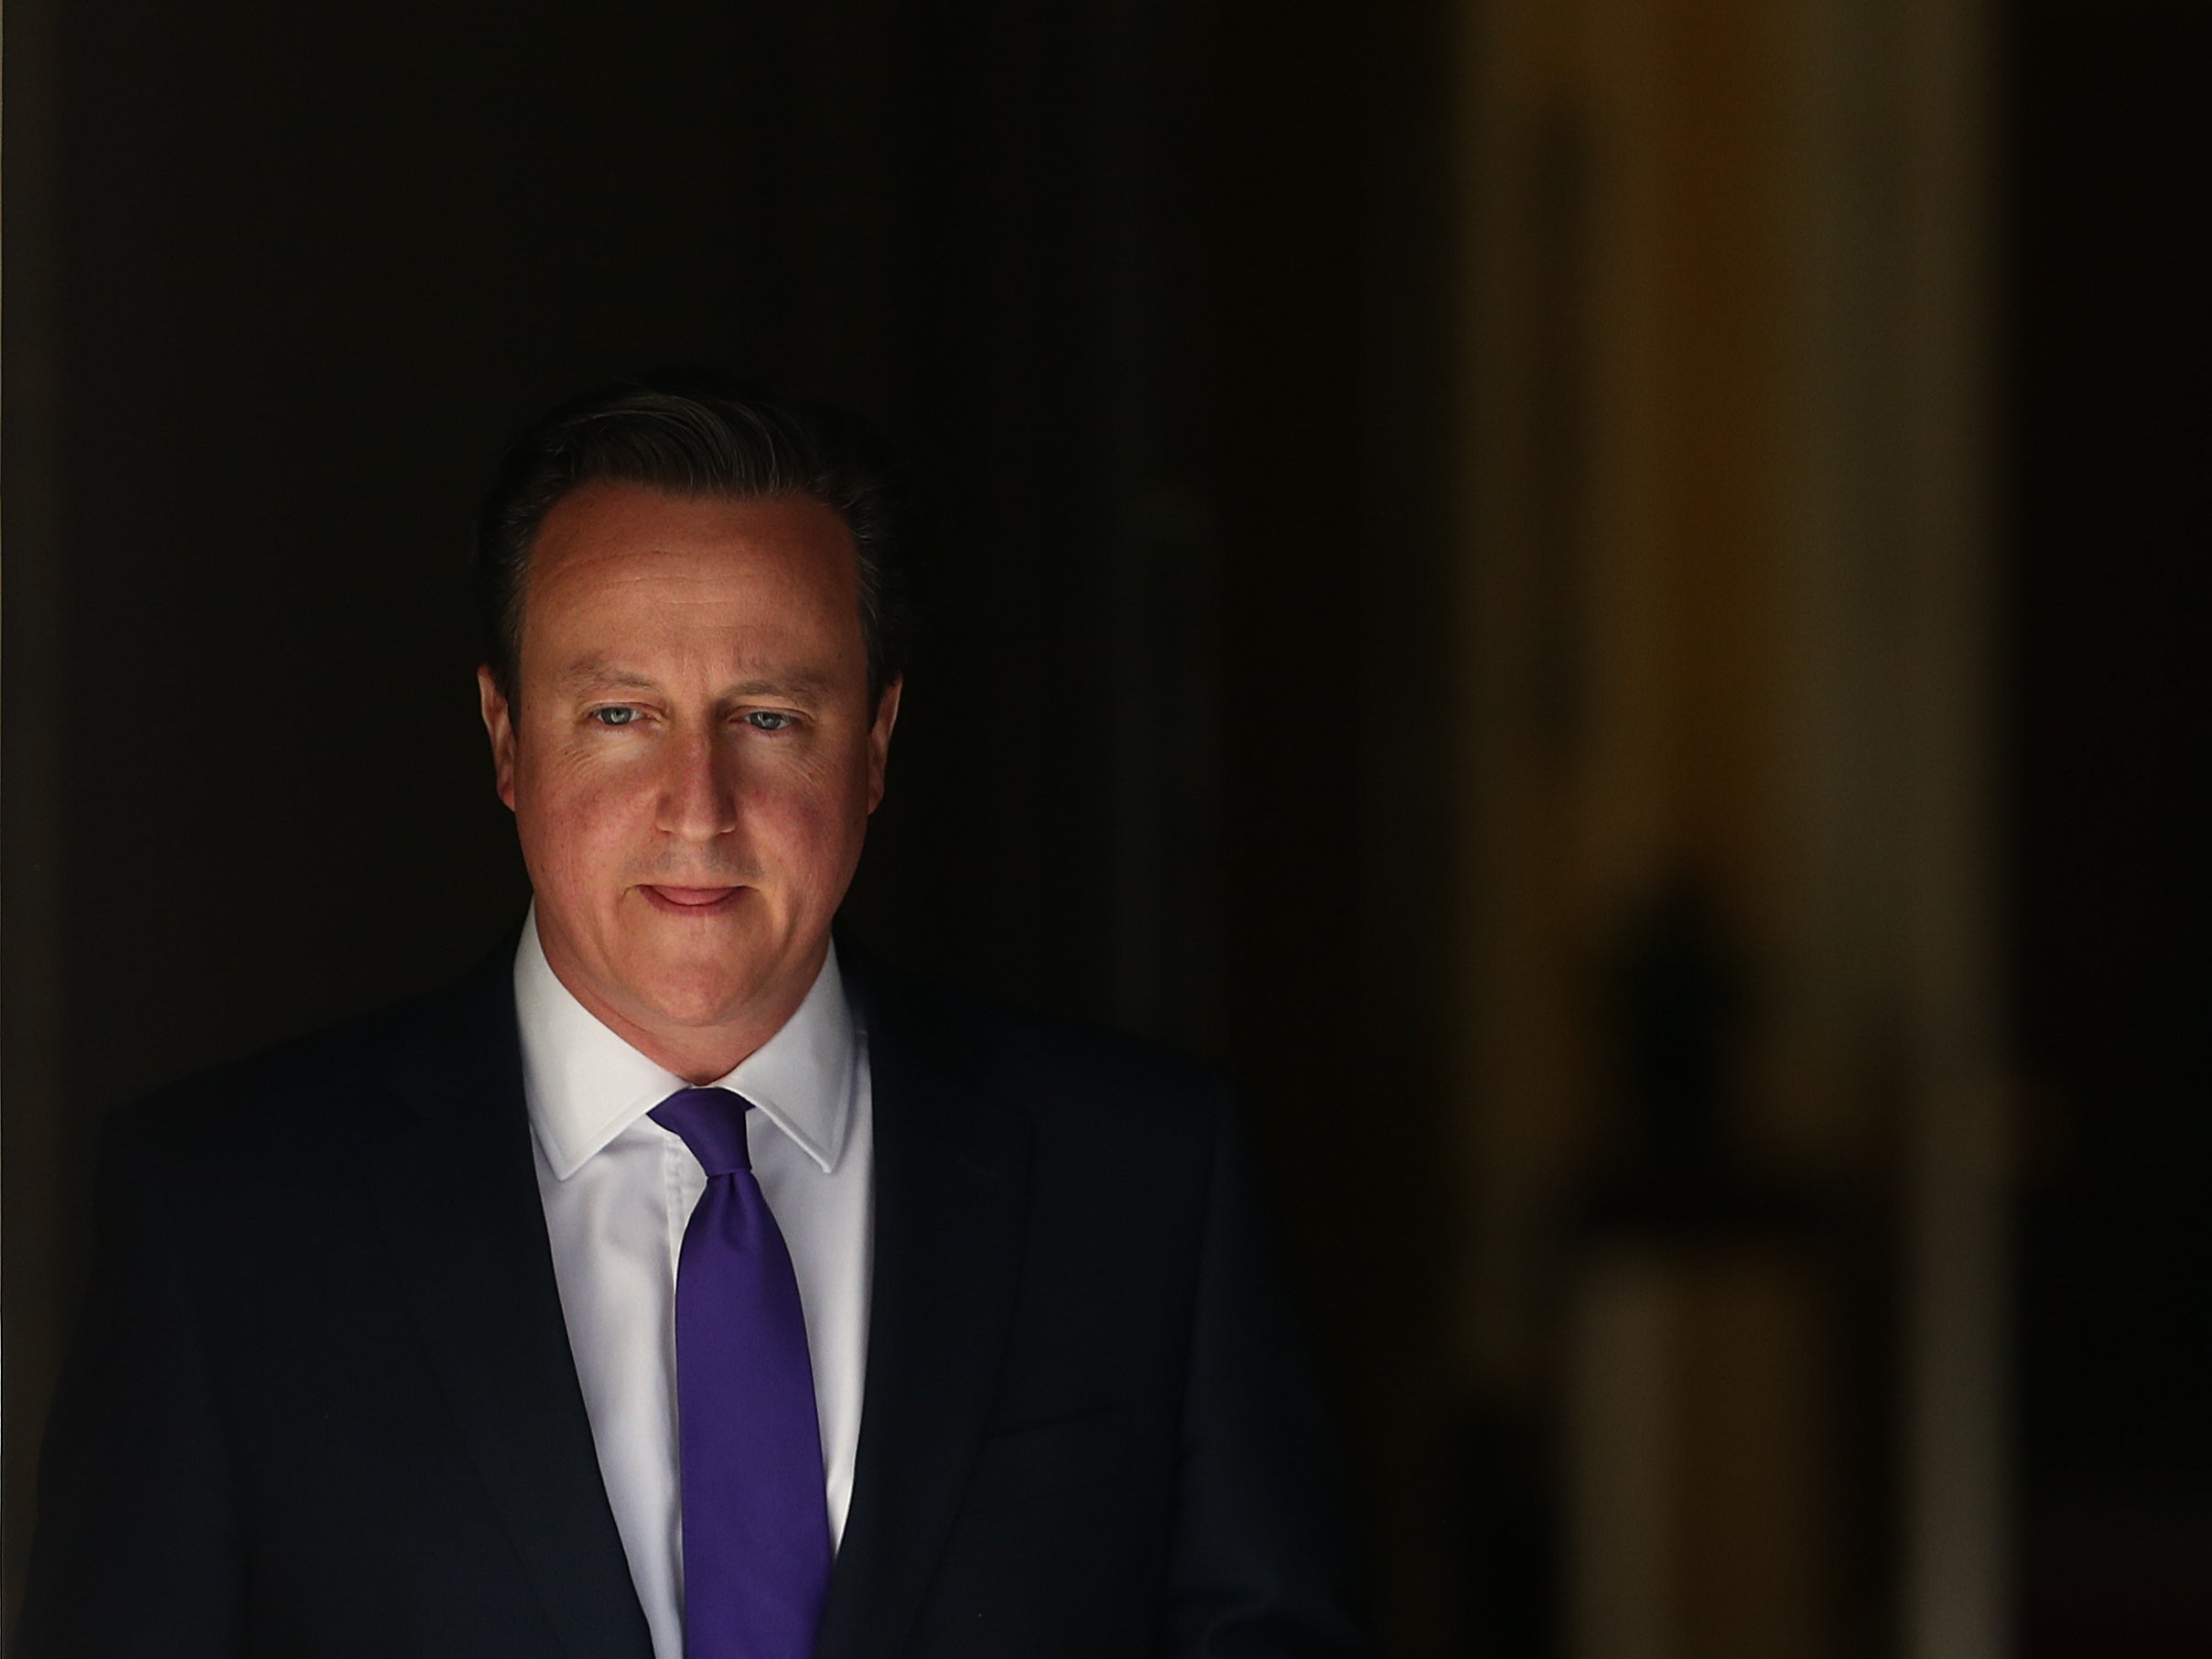 David Cameron has worked for Greensill Capital since 2018